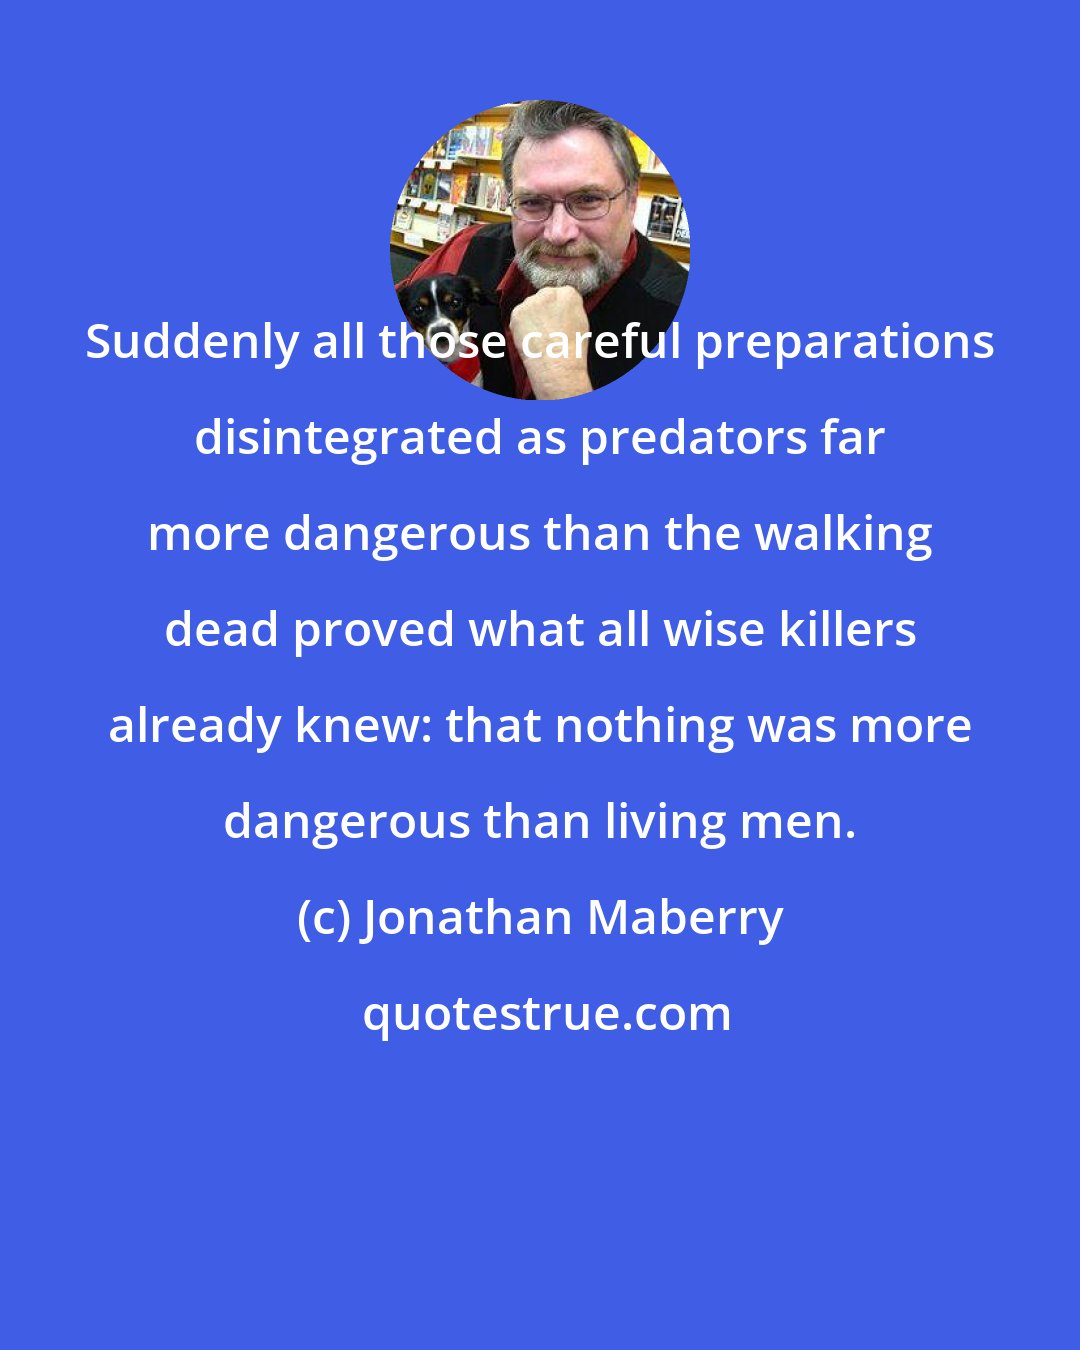 Jonathan Maberry: Suddenly all those careful preparations disintegrated as predators far more dangerous than the walking dead proved what all wise killers already knew: that nothing was more dangerous than living men.